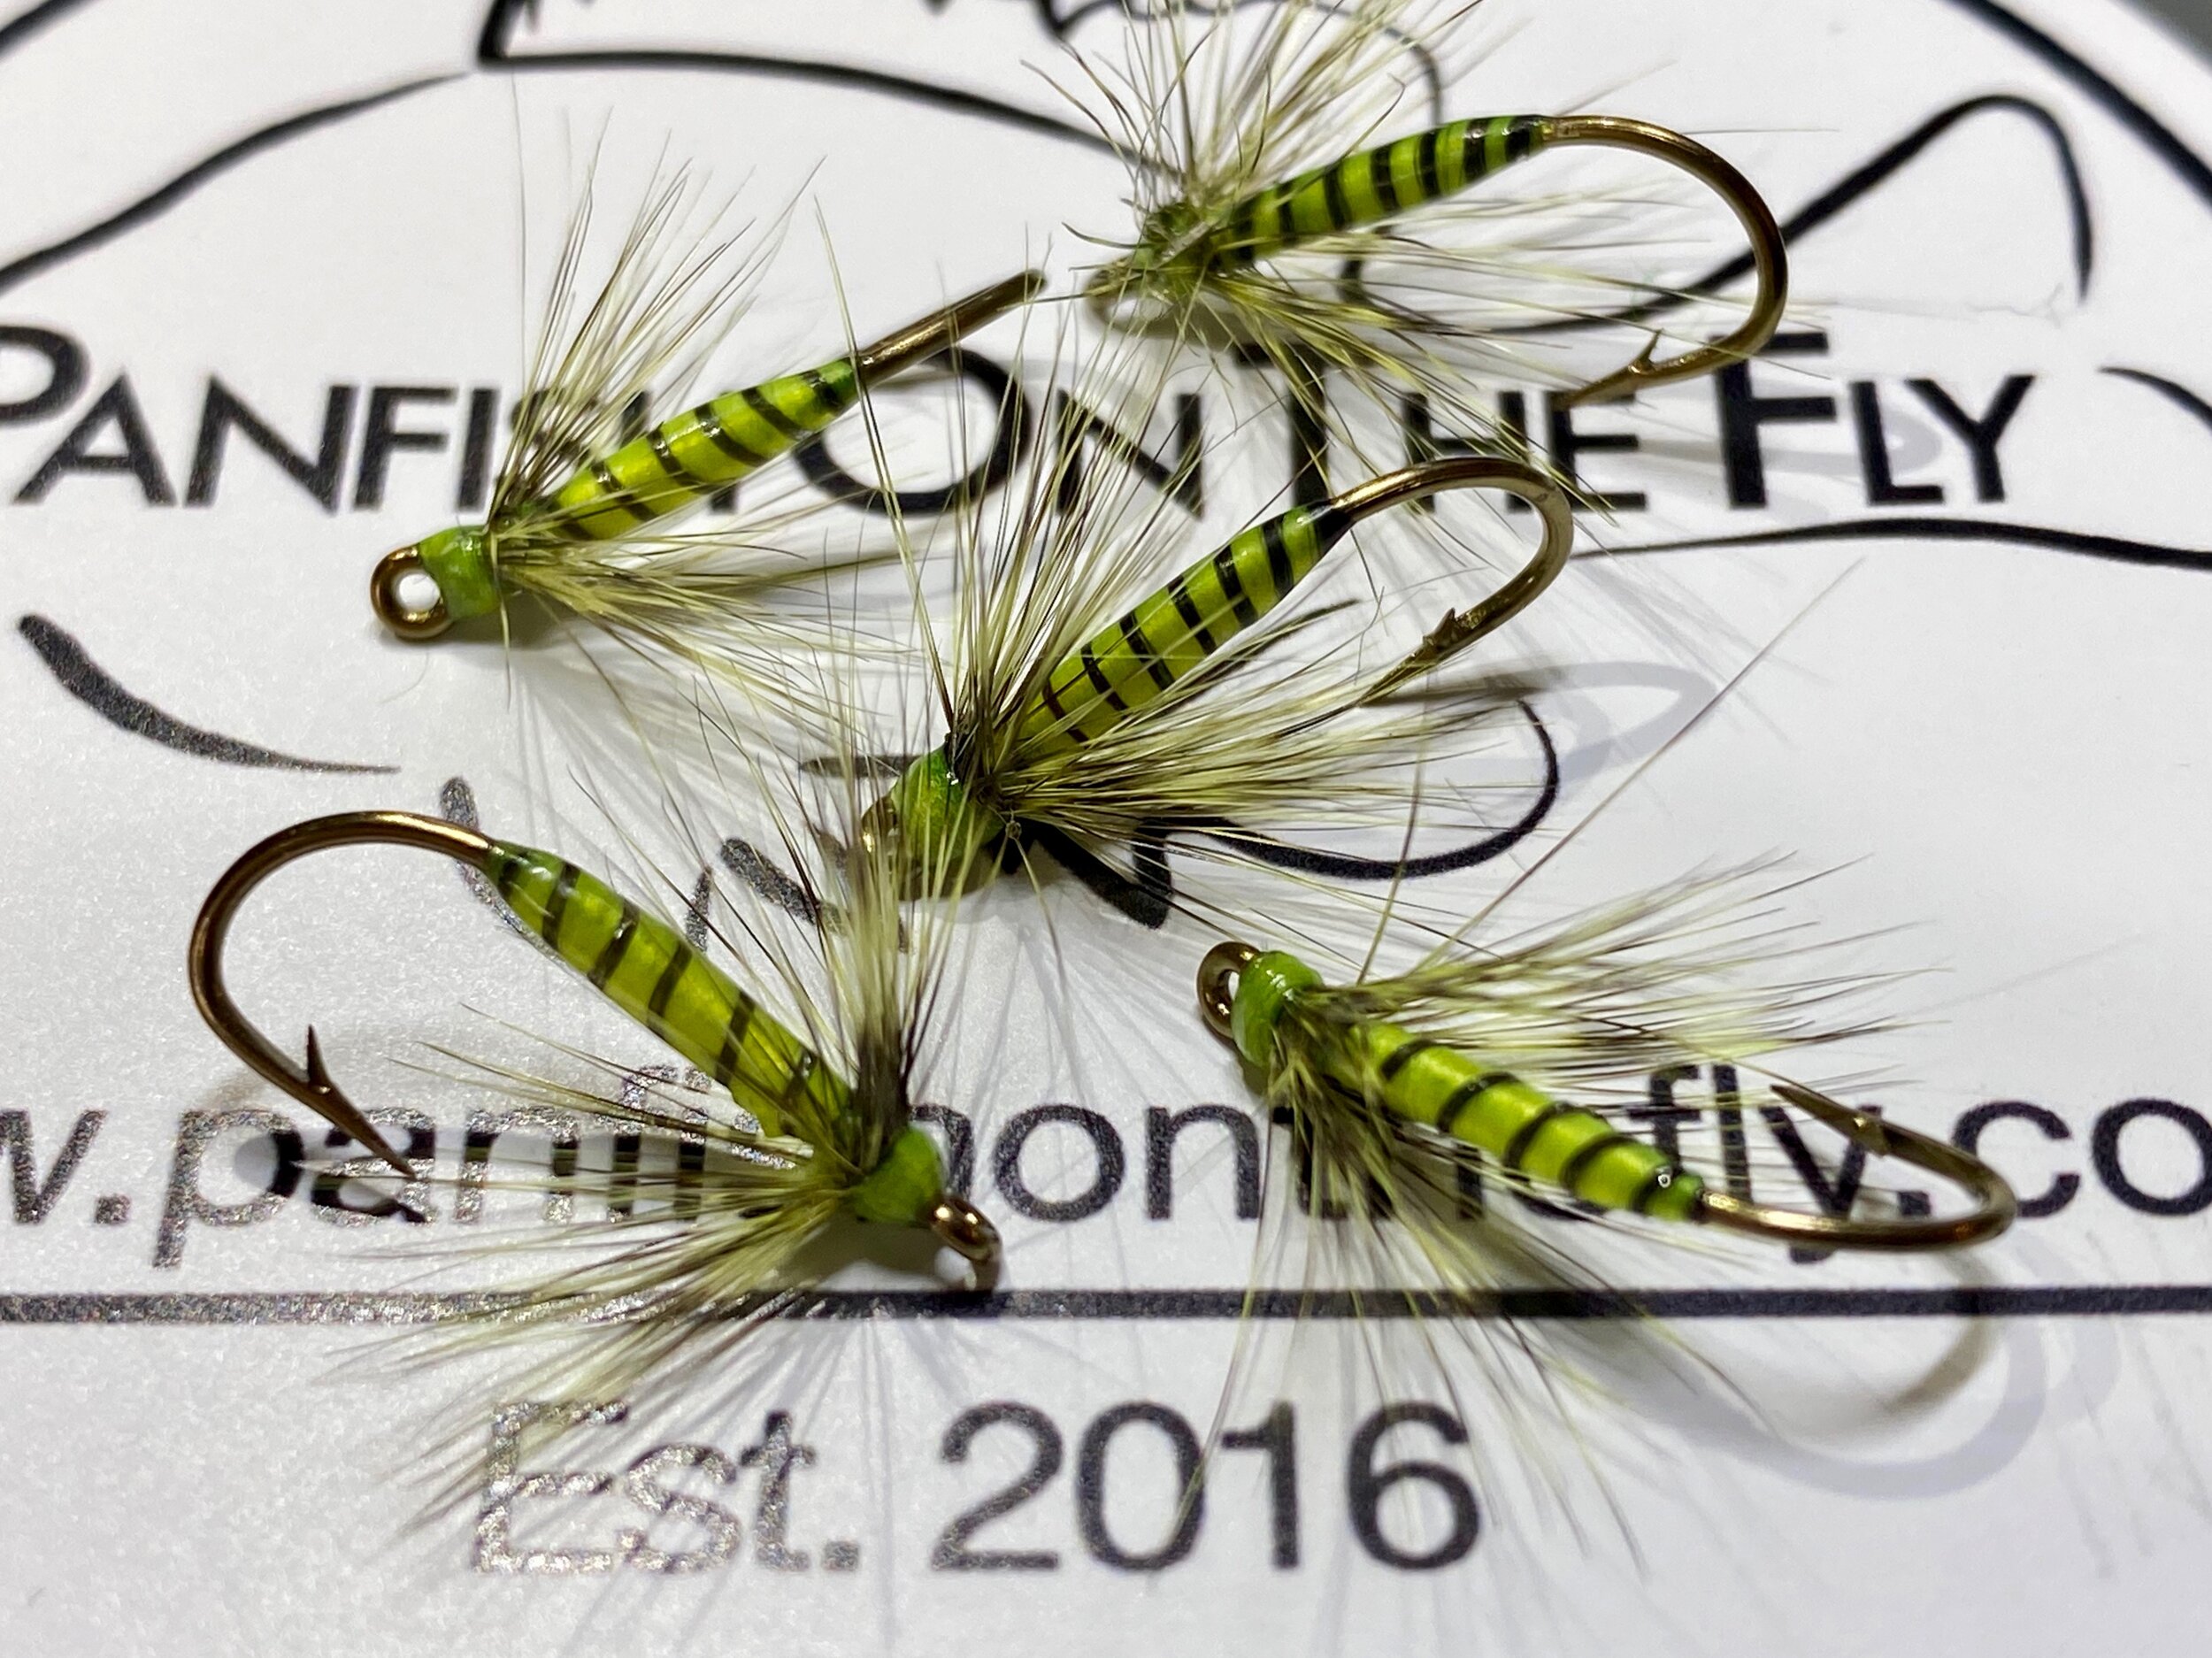 Wet Flies for Fly Fishing